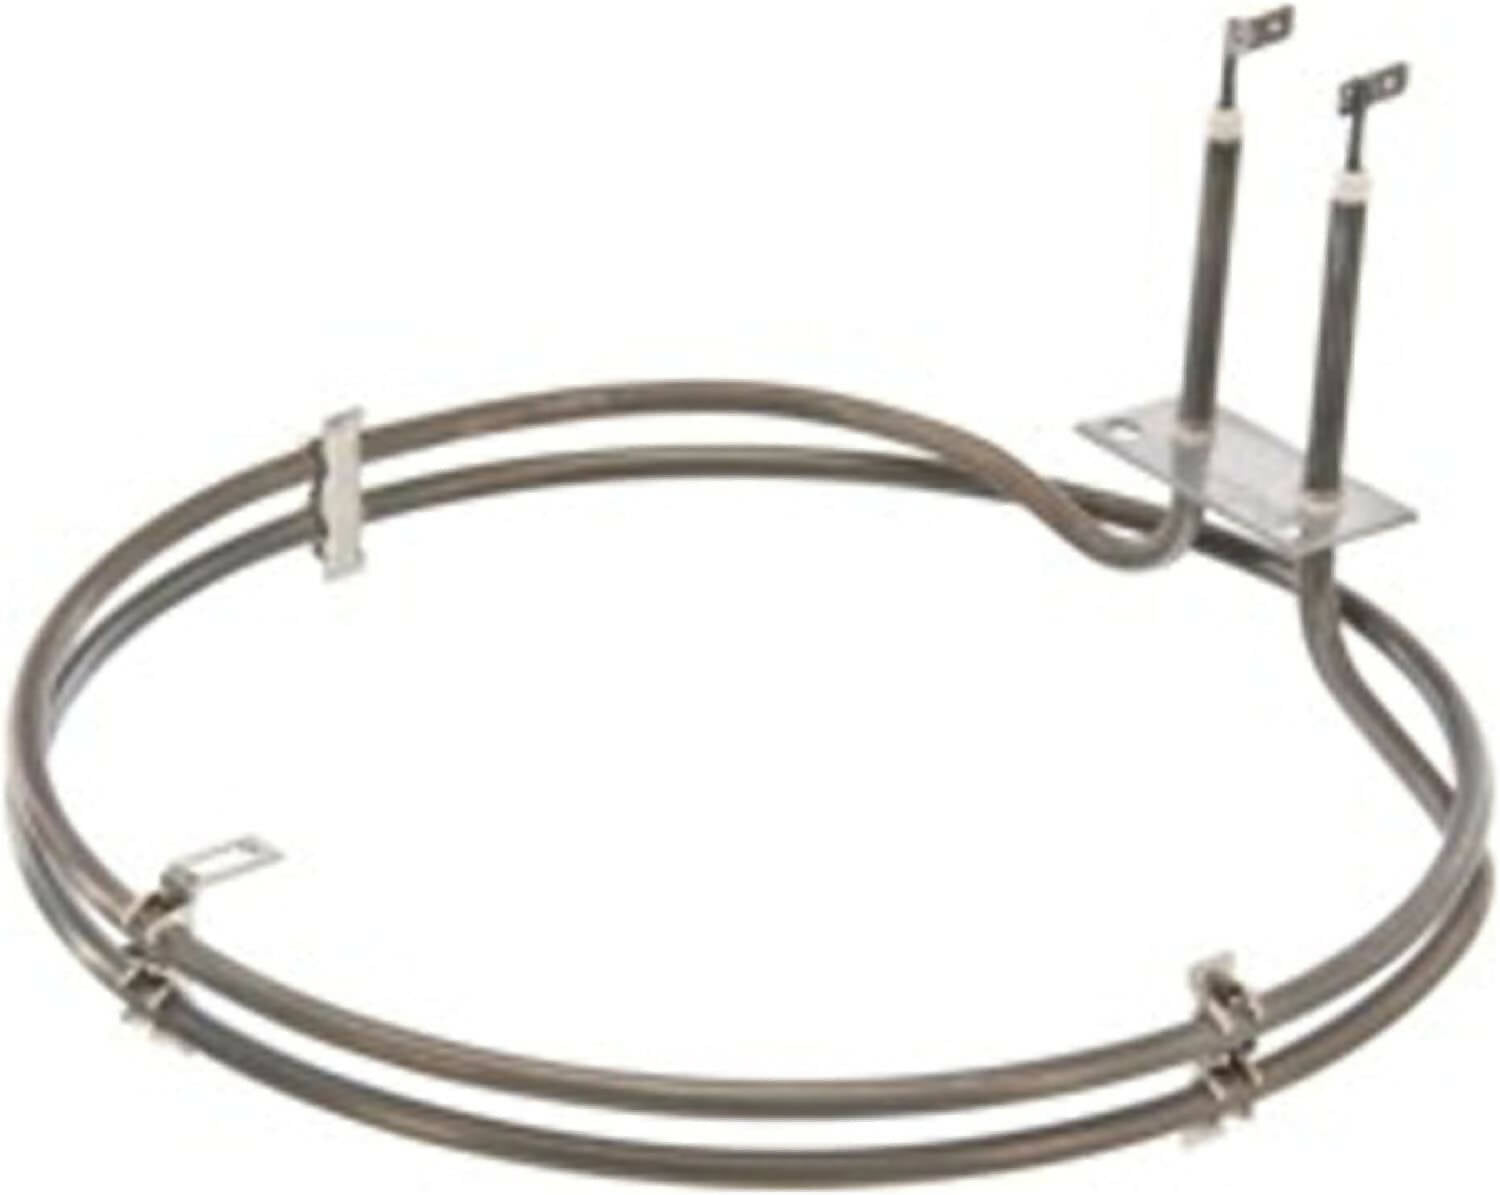 Convection Heating Element - 00484787, Replaces: 14-38-445 484787 PD00008708 OEM PARTS WORLD